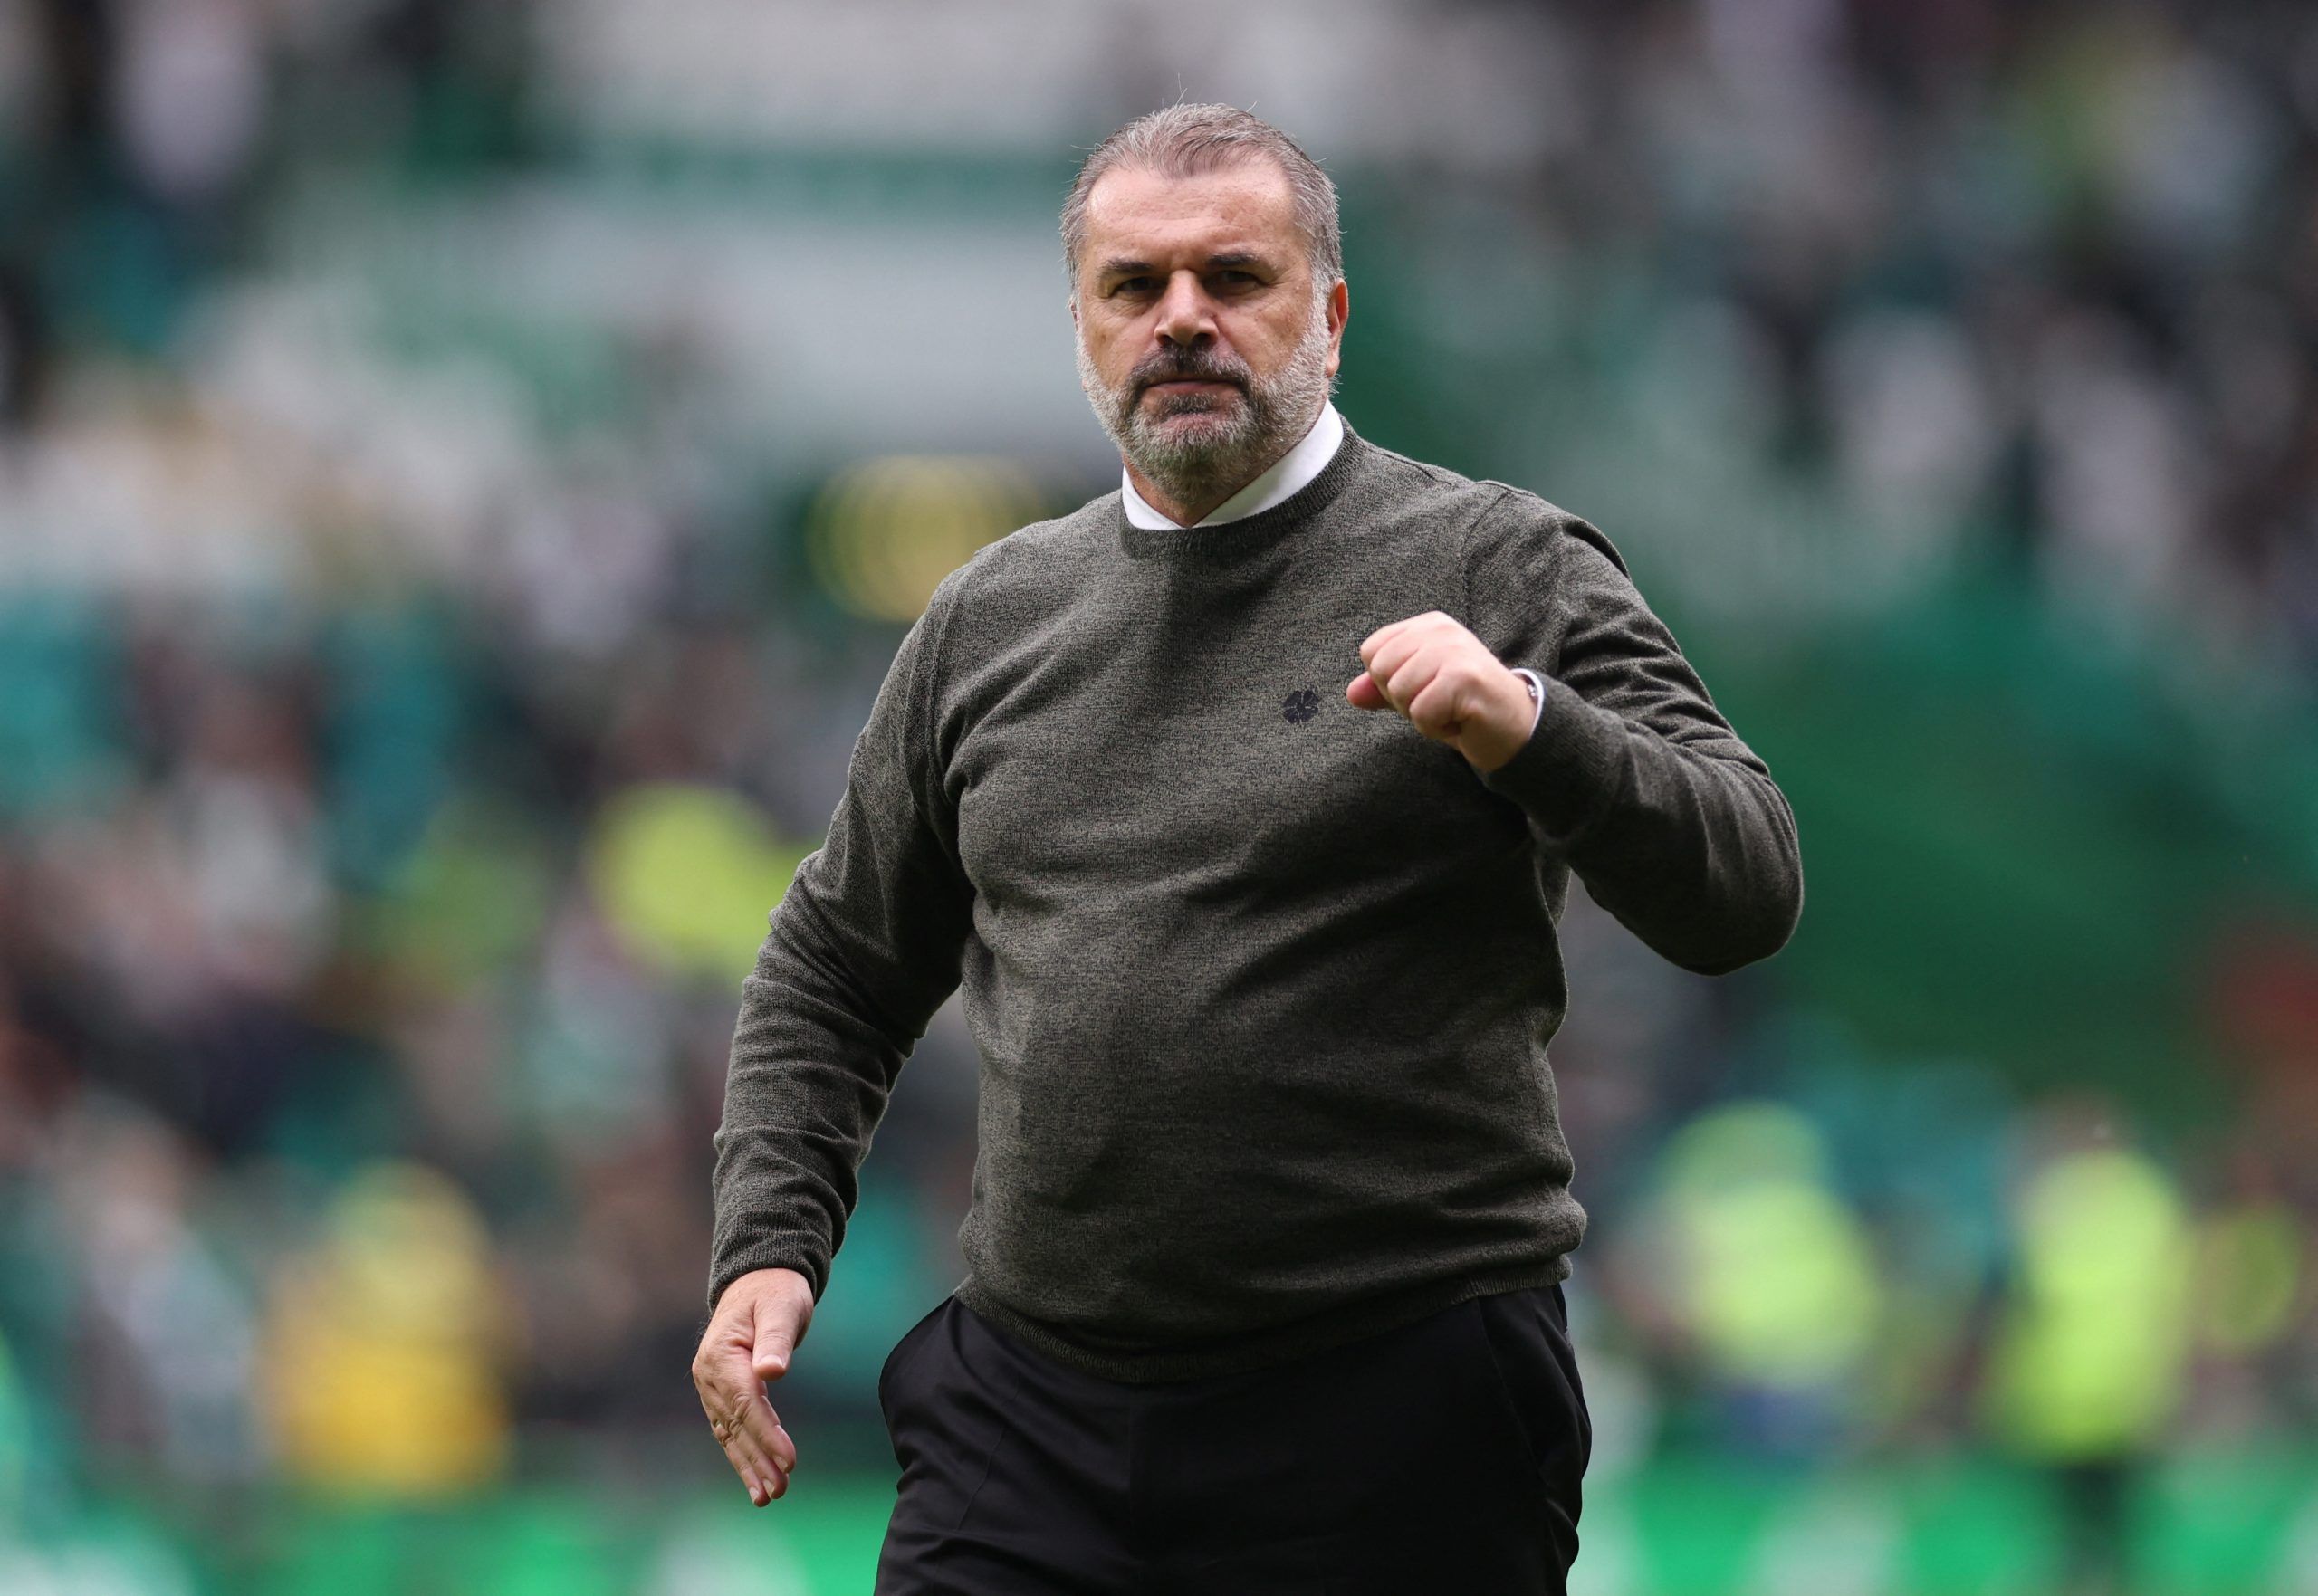 Celtic could receive ‘record fees’ for Hatate, Abada and Jota -Celtic News